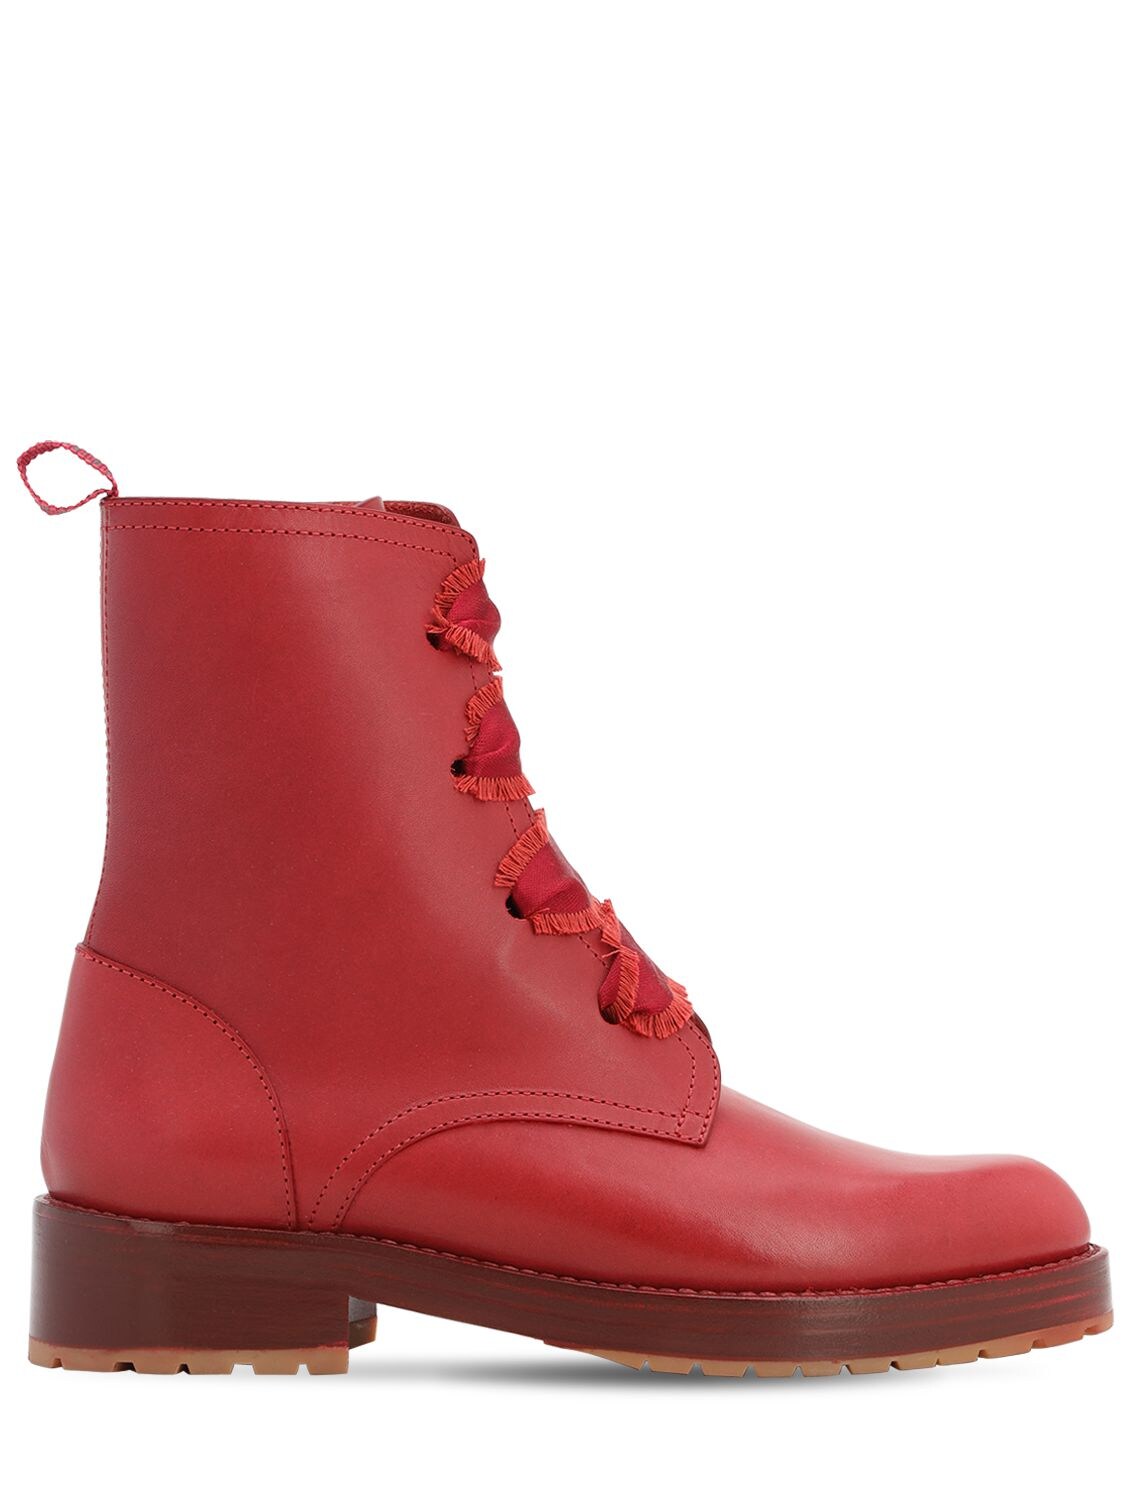 RED VALENTINO 30MM COMBALLET LEATHER ANKLE BOOTS,71IMAG001-MZI50